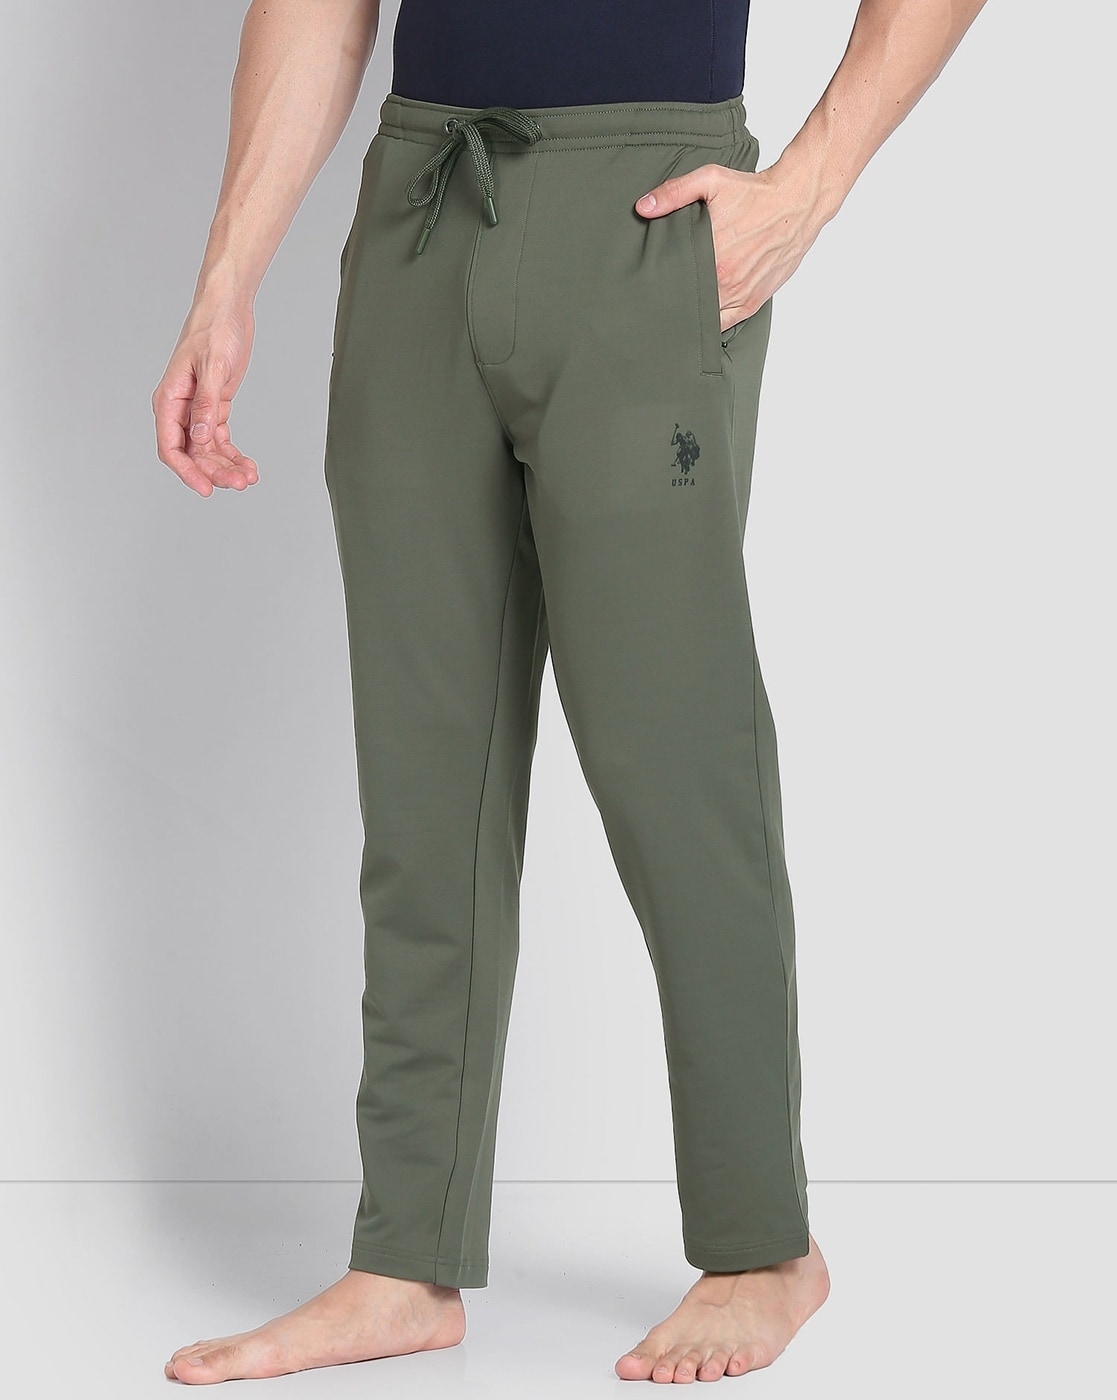 U.S. Polo Assn. Joggers Are the Best Lounge Pants Around | Us Weekly